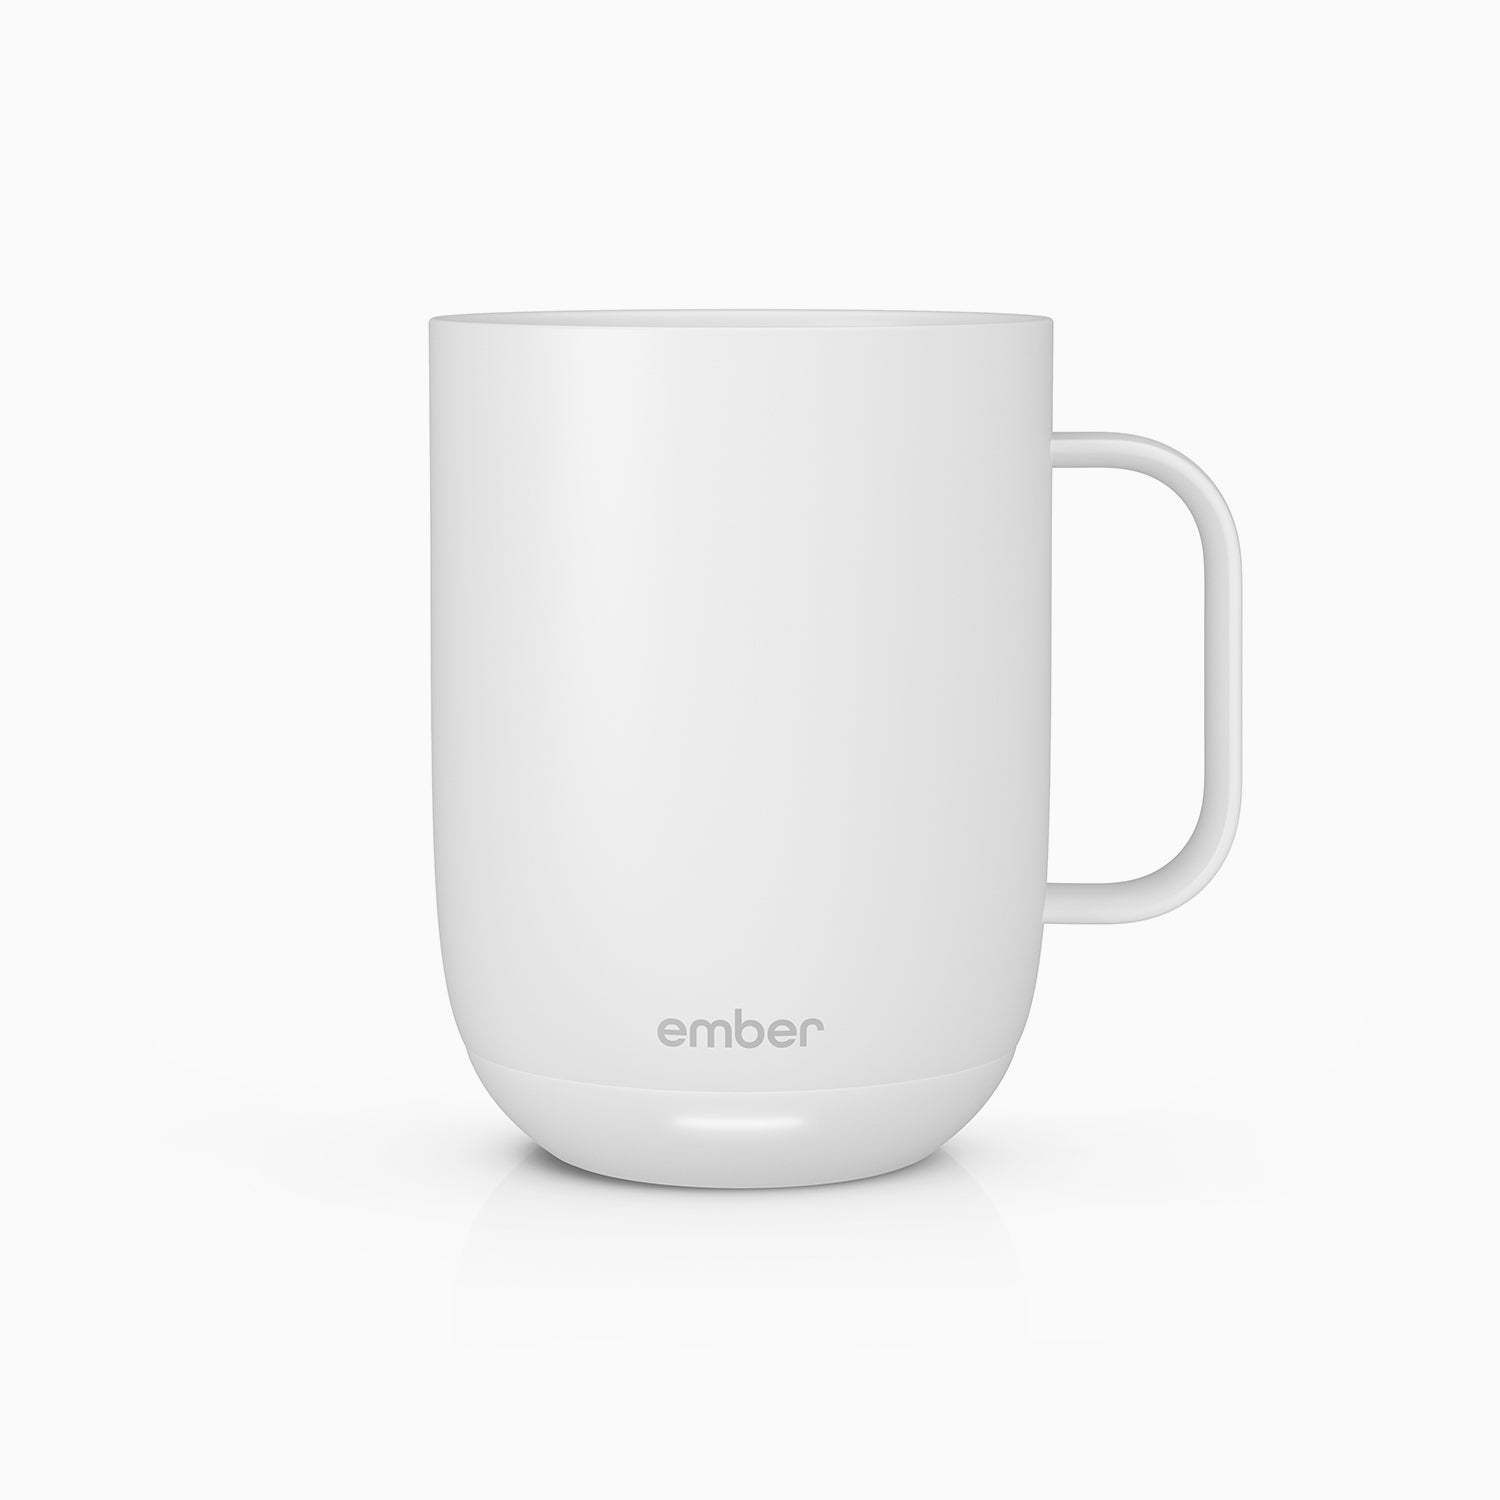 Thinx, Ember Mug and 1Password: Best online sales right now